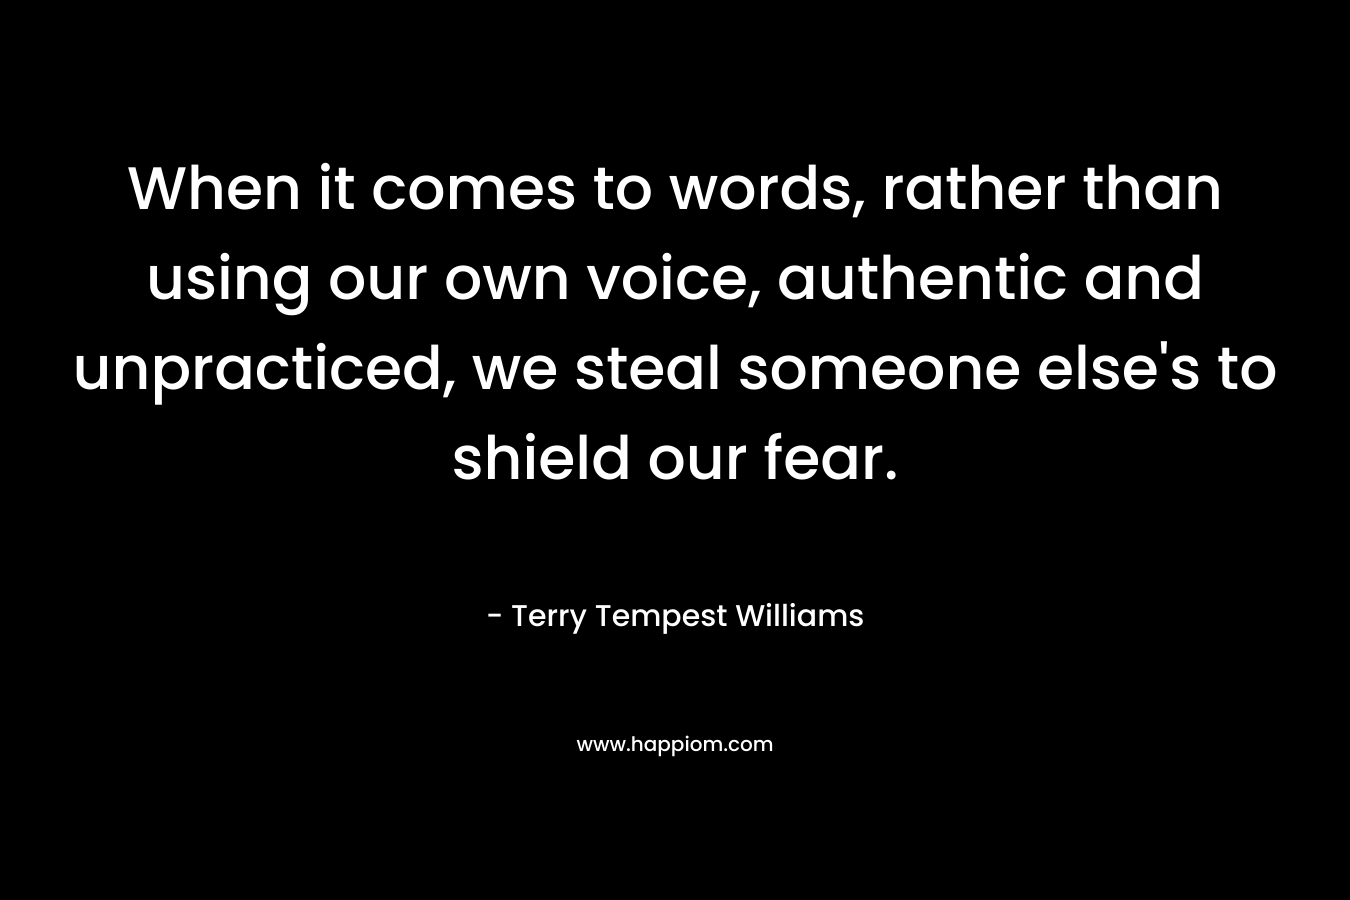 When it comes to words, rather than using our own voice, authentic and unpracticed, we steal someone else's to shield our fear.